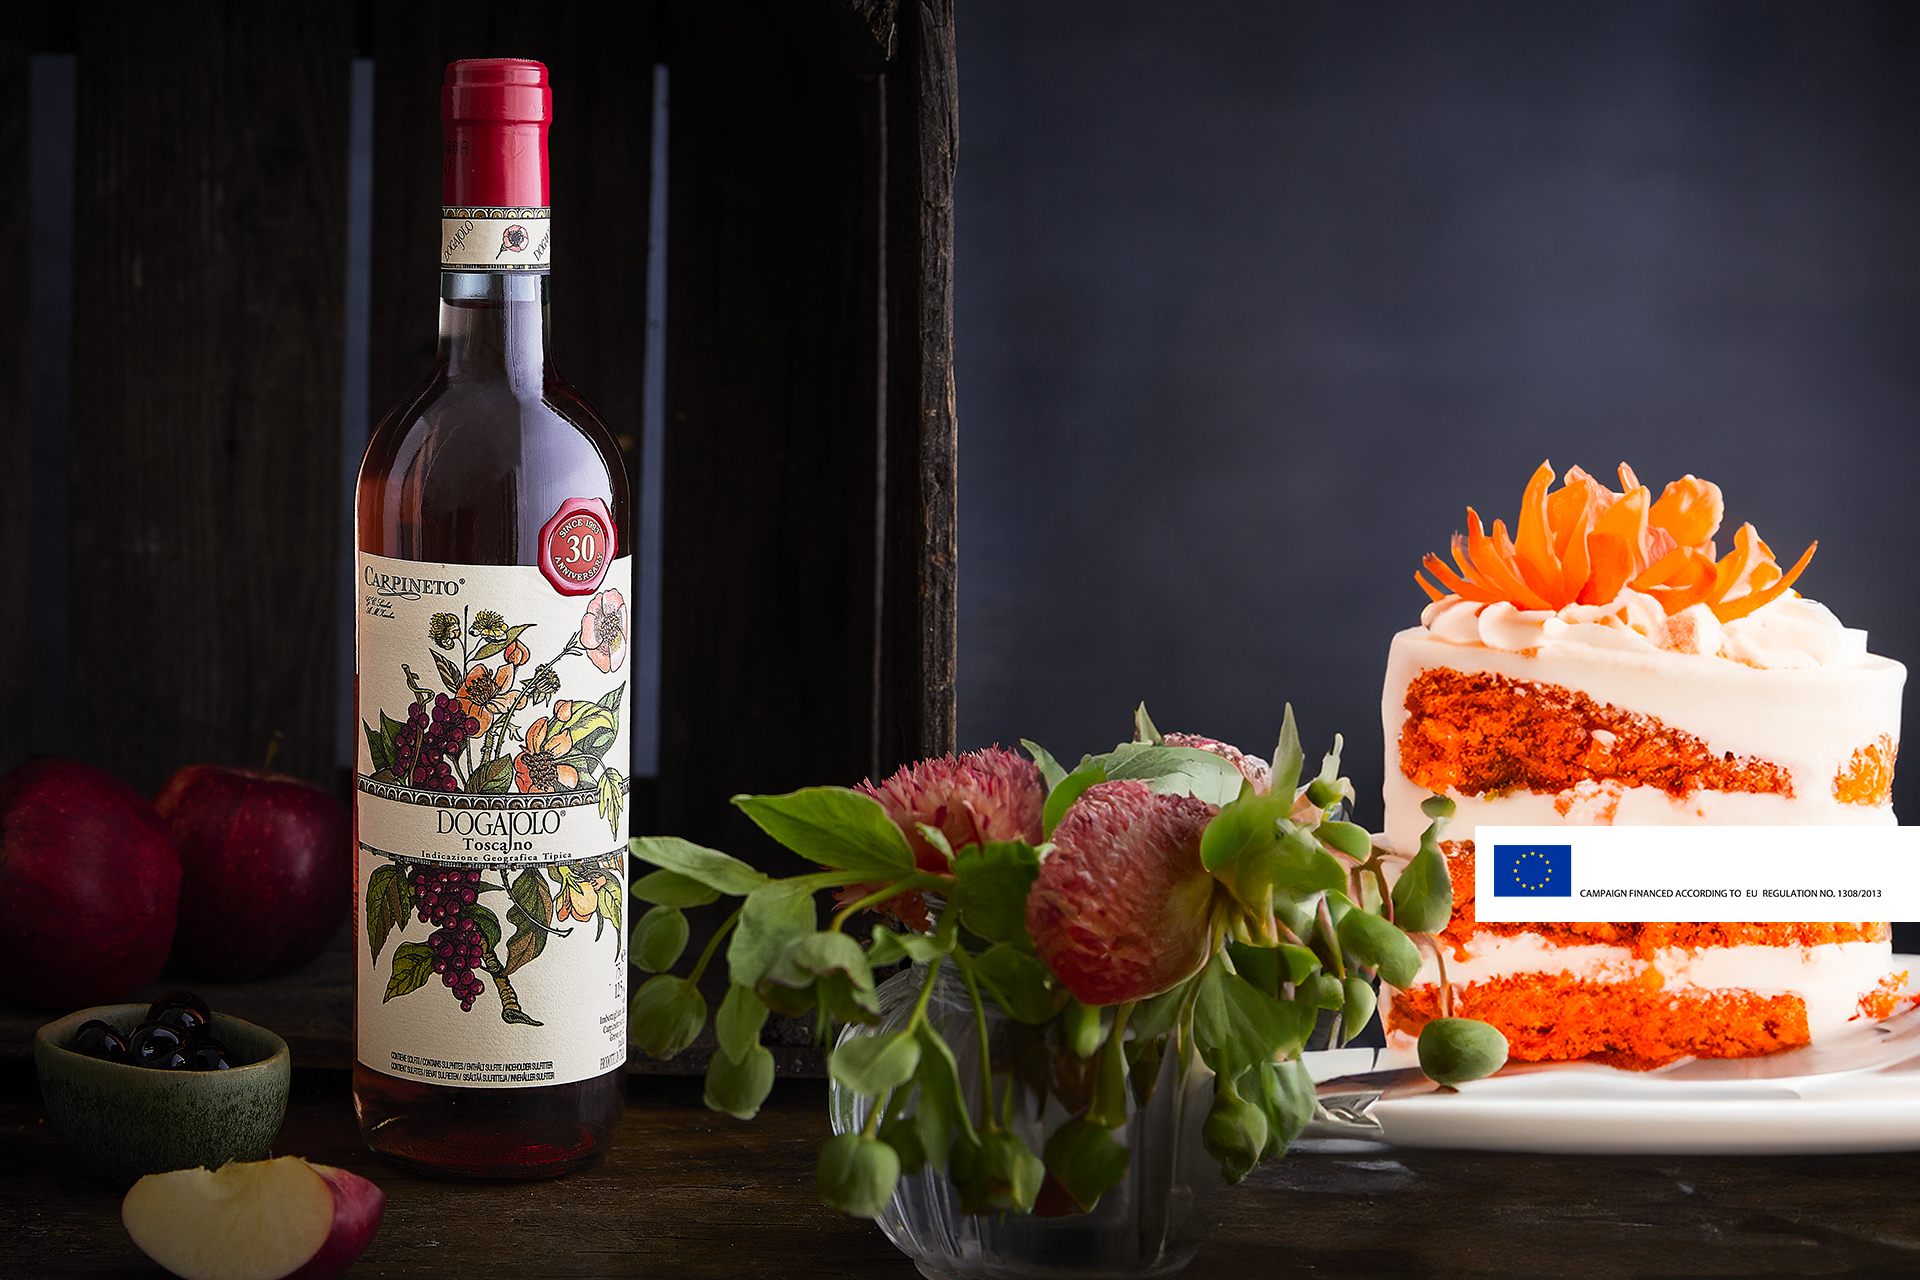 National Carrot Cake Day: The perfect recipe and wine pairing for you
